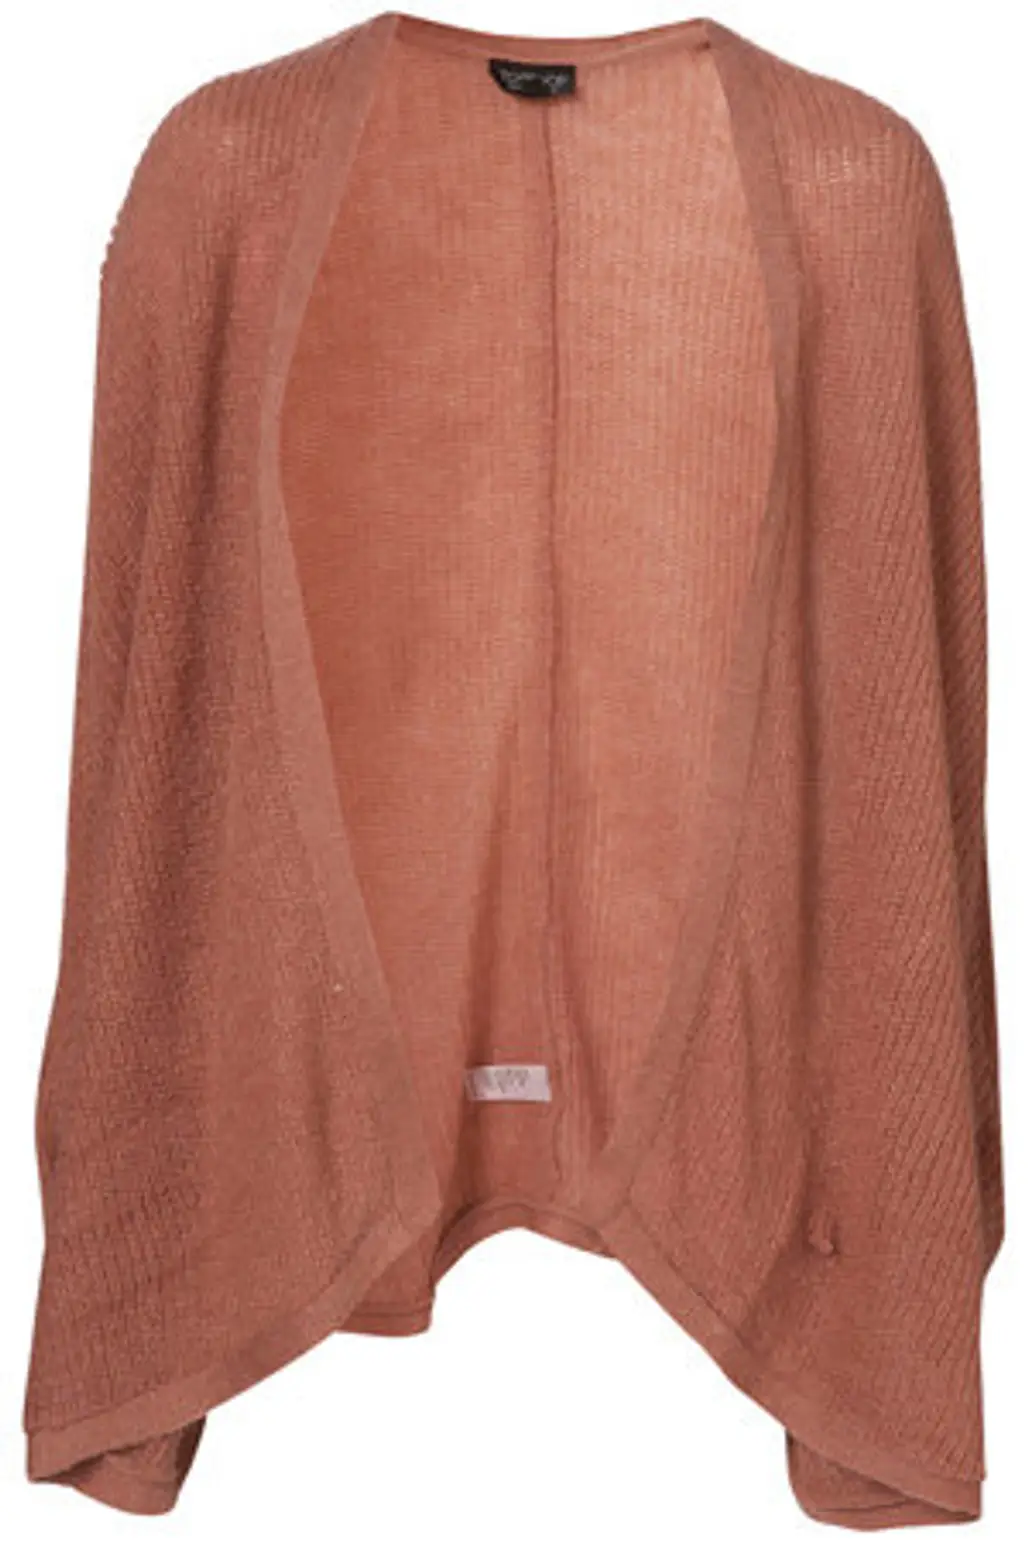 Topshop Knitted Rose Rib Cape Cardigan